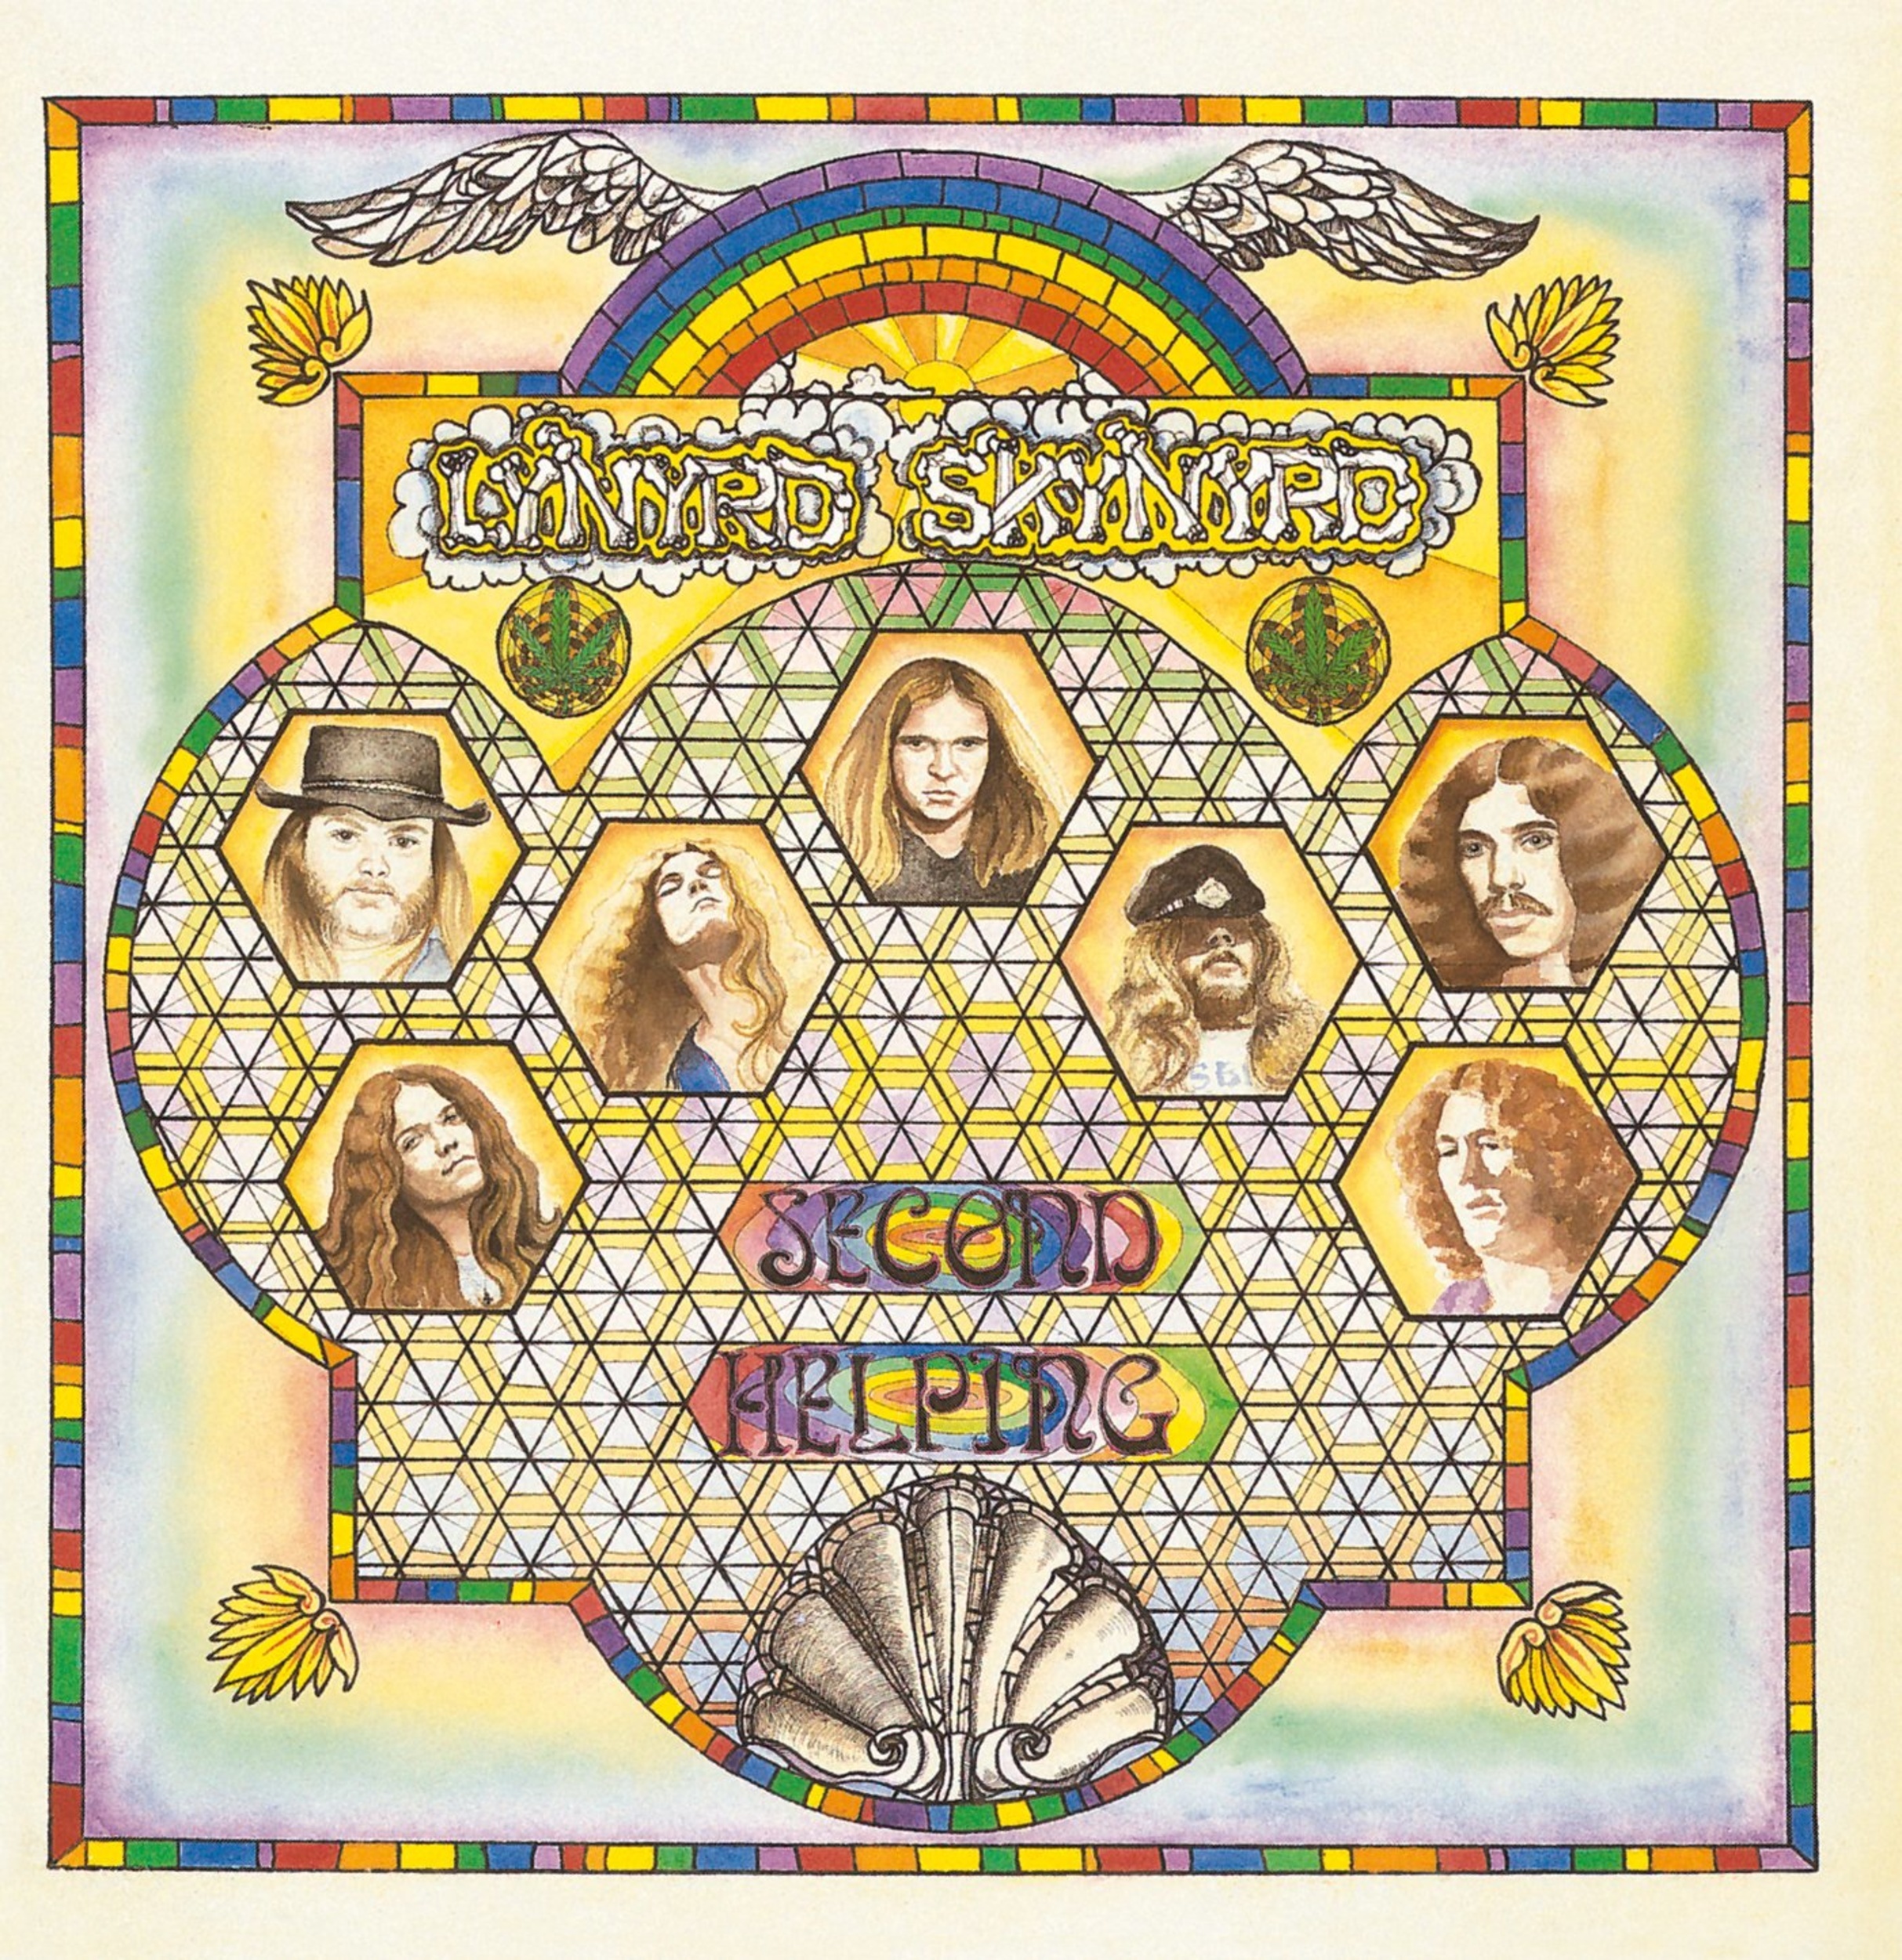 <p>The Skynyrd influences ran deeper and were far and wide. Most notably, their collective love of blues rock. The band paid homage to that specific area with its cover of J.J. Cale's "<a href="https://www.youtube.com/watch?v=z499WFdQN-4">Call Me the Breeze</a>," from <em>Second </em><em>Helping</em>. The track has been covered countless times, but Lynyrd Skynyrd's version is arguably the most recognizable and best of the bunch — even better than Eric Clapton's recorded take from 2014.</p><p>You may also like: <a href='https://www.yardbarker.com/entertainment/articles/famous_actors_who_had_early_roles_in_horror_movies_101323/s1__33155618'>Famous actors who had early roles in horror movies</a></p>